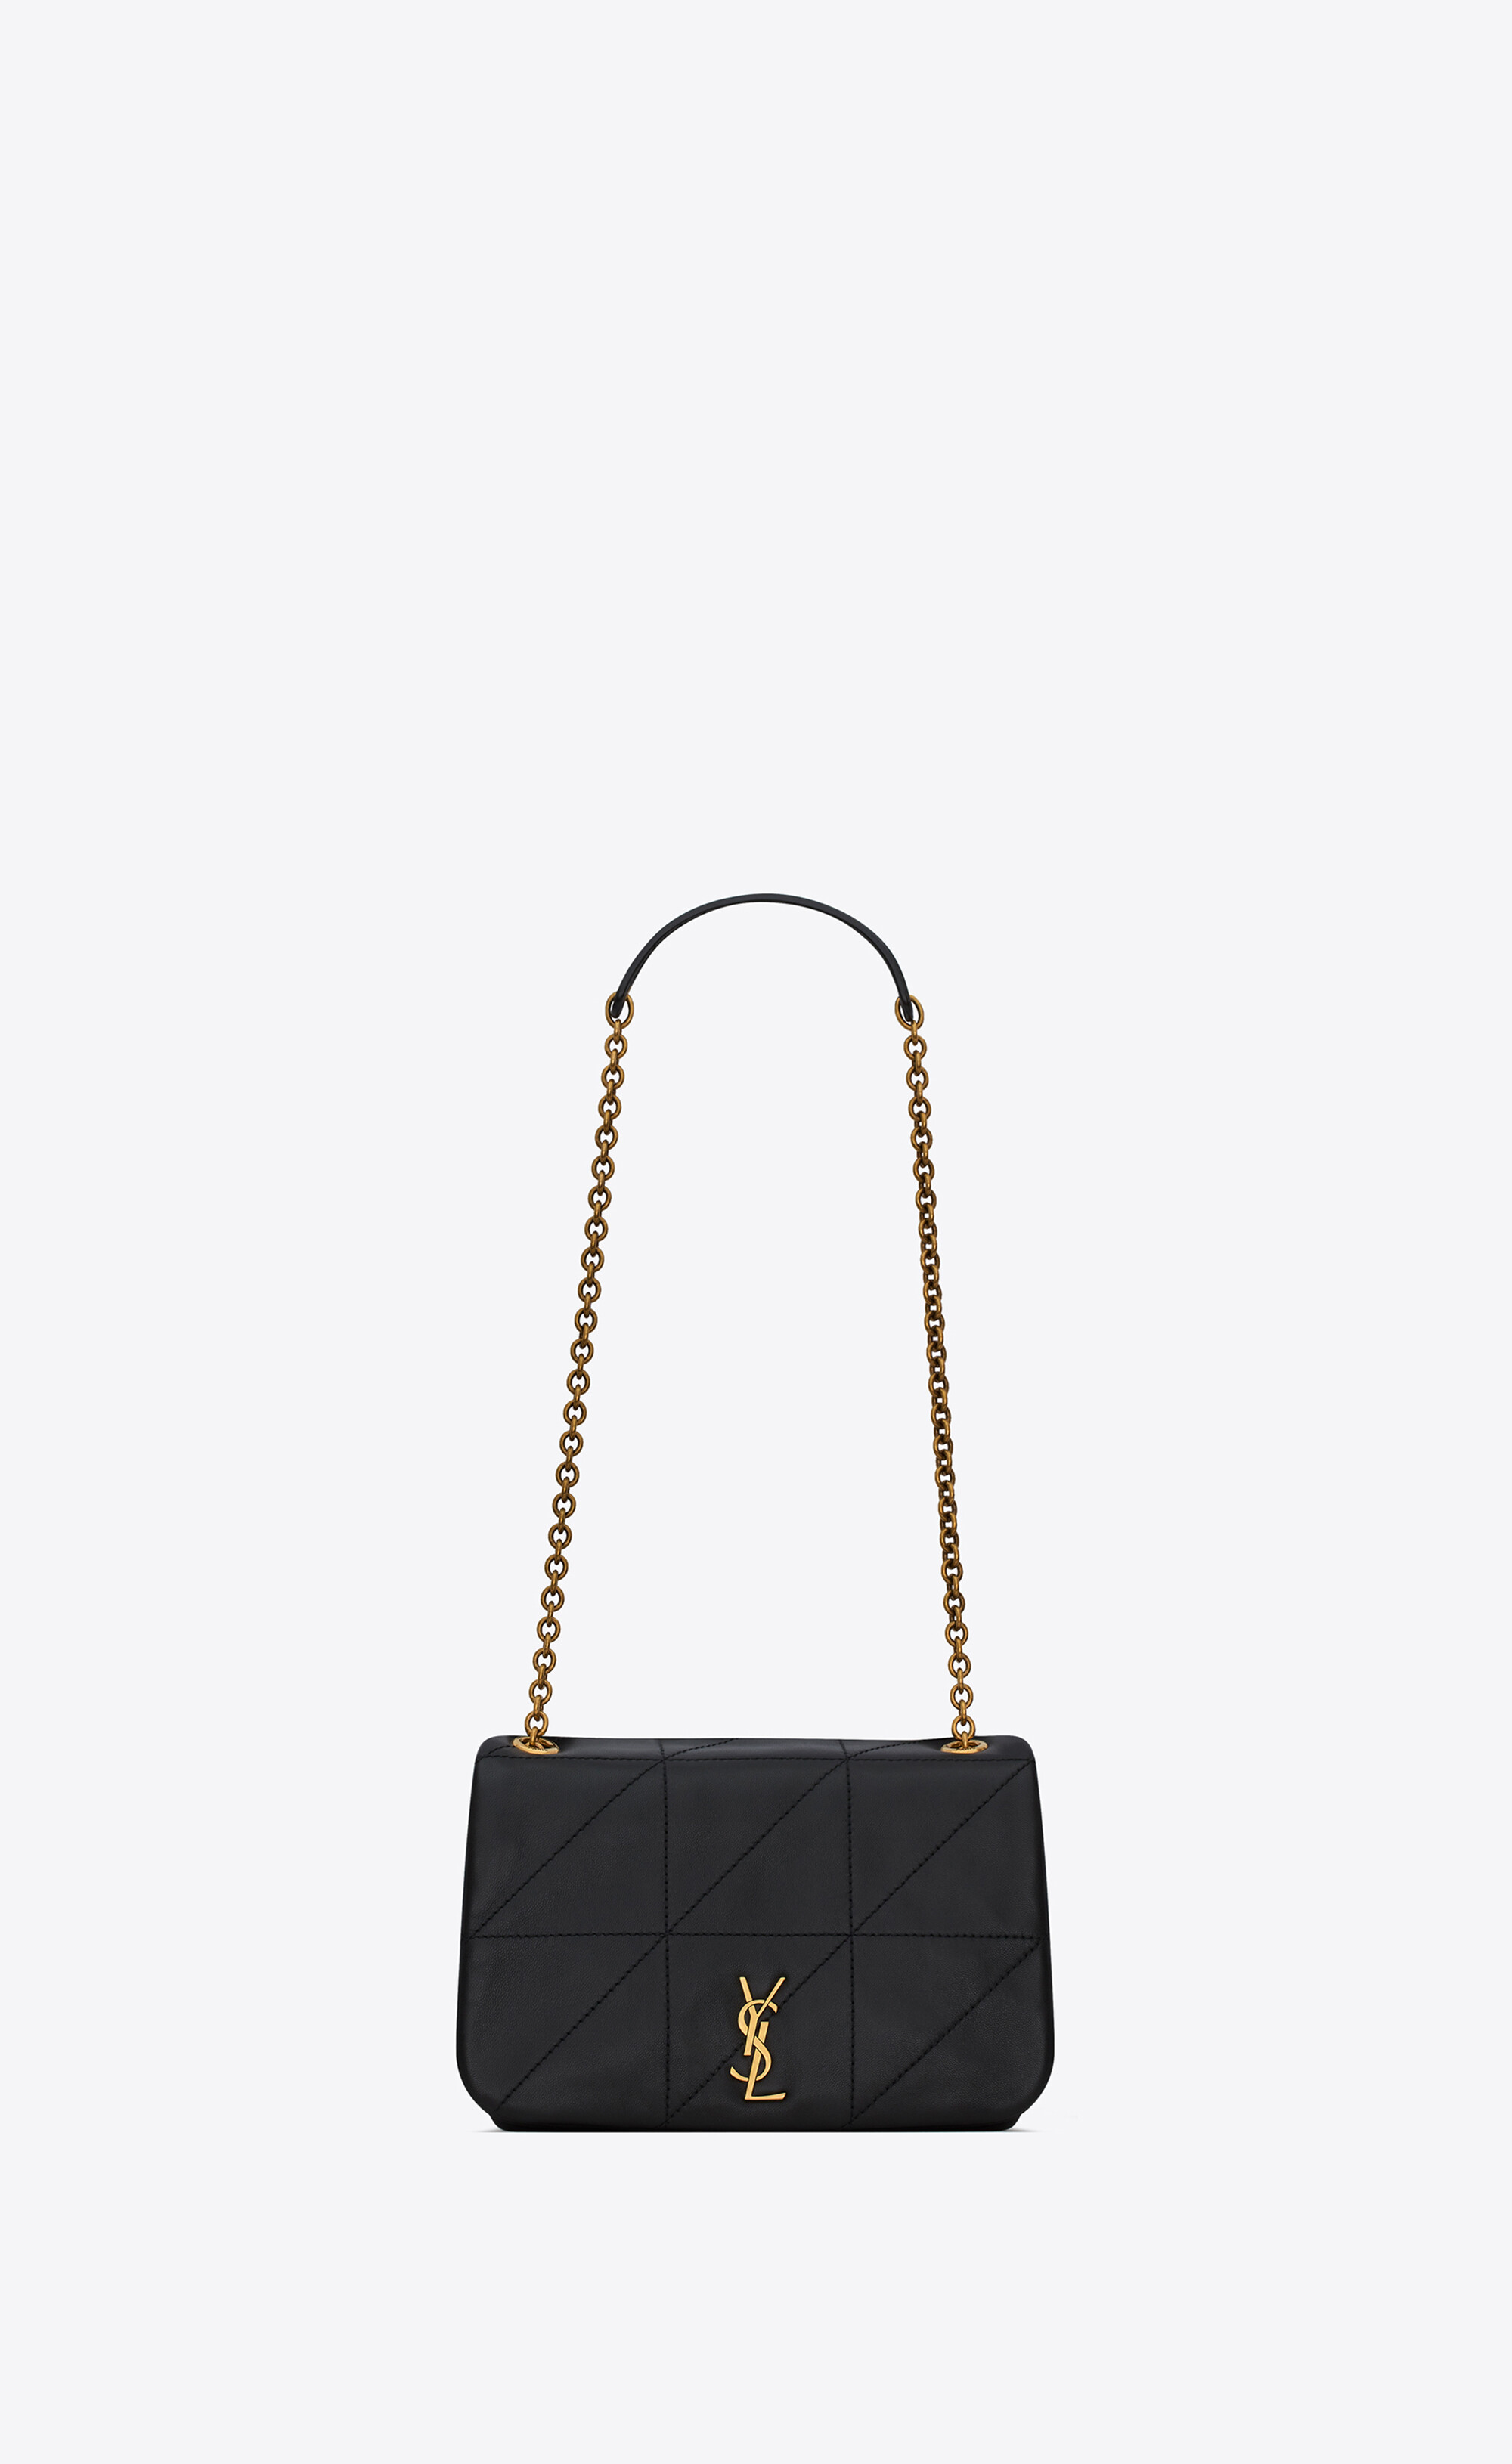 Mulberry Jamie Bucket Bag in Midnight Blue Woven Denim & Vegetable Tanned  Leather - SOLD